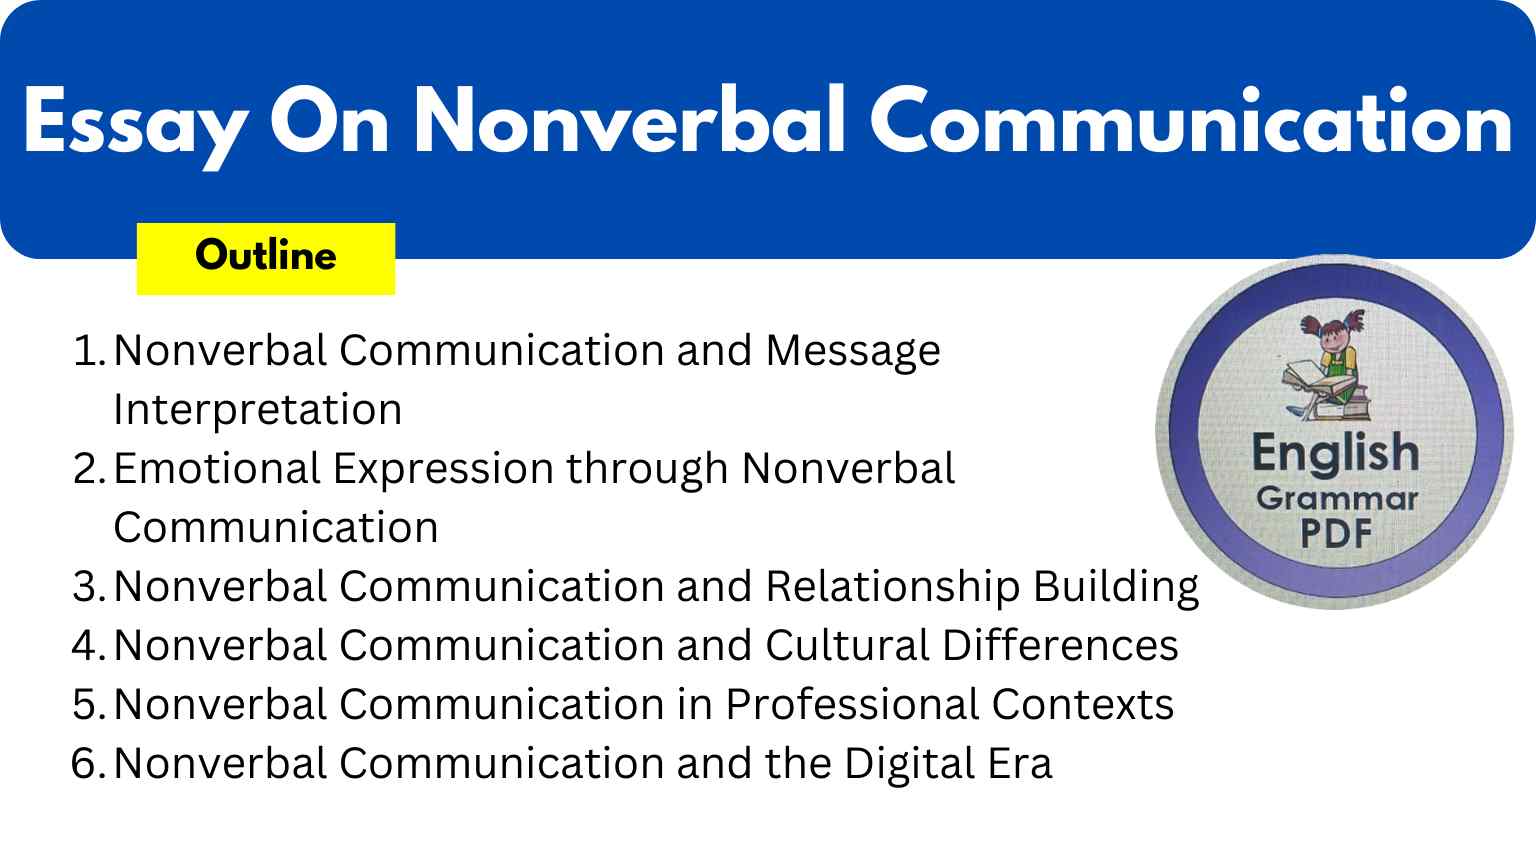 Essay On Nonverbal Communication